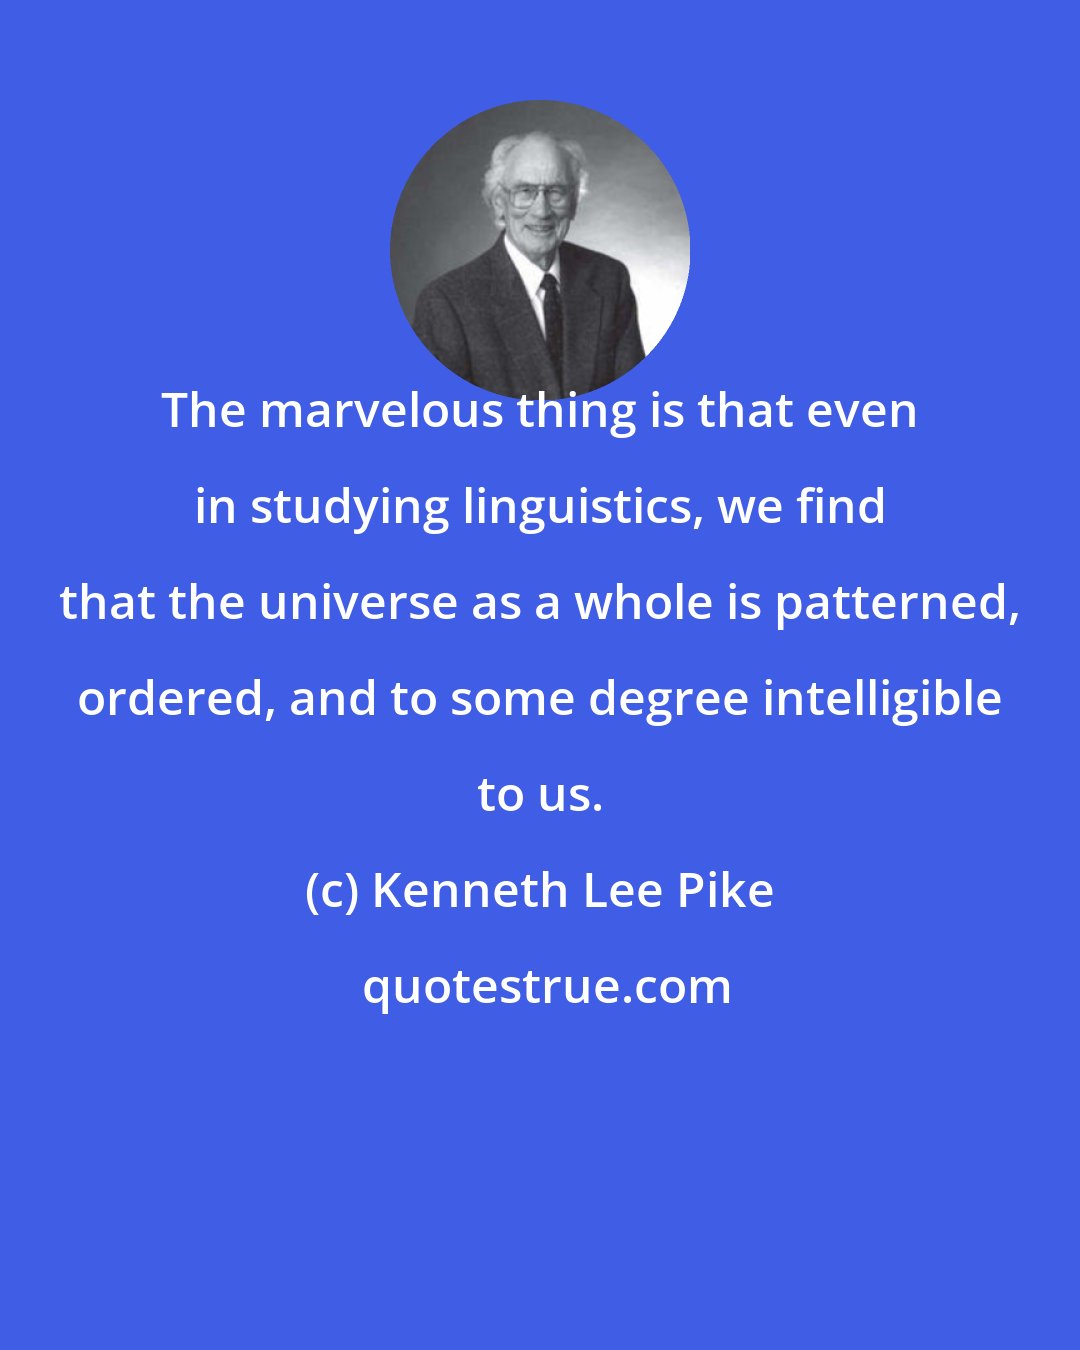 Kenneth Lee Pike: The marvelous thing is that even in studying linguistics, we find that the universe as a whole is patterned, ordered, and to some degree intelligible to us.